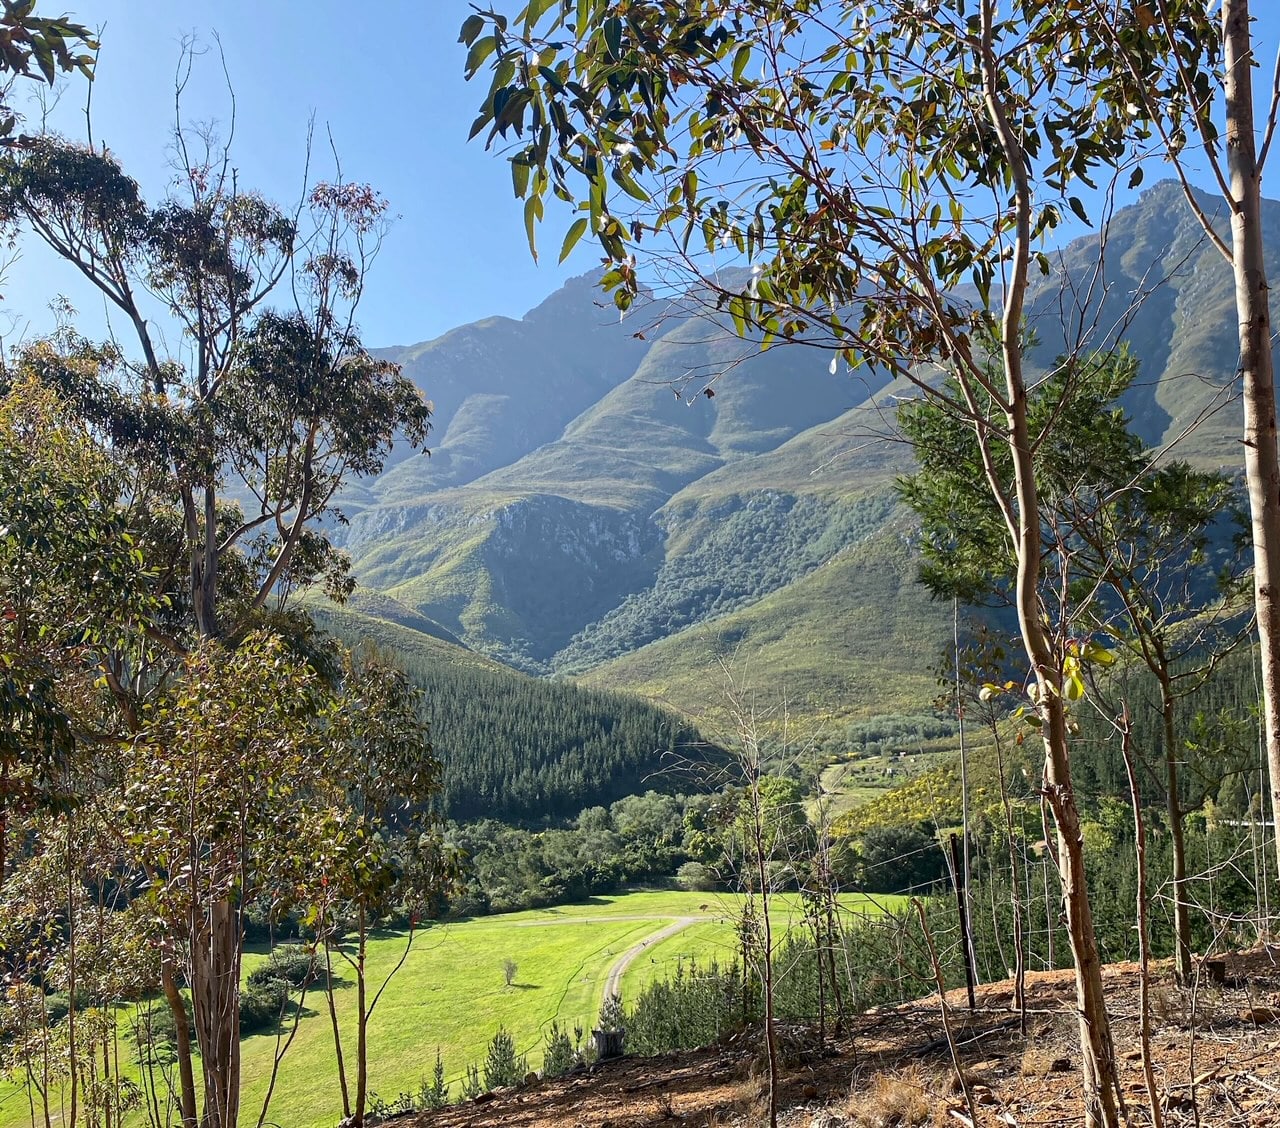 The perfect weekend in Swellendam